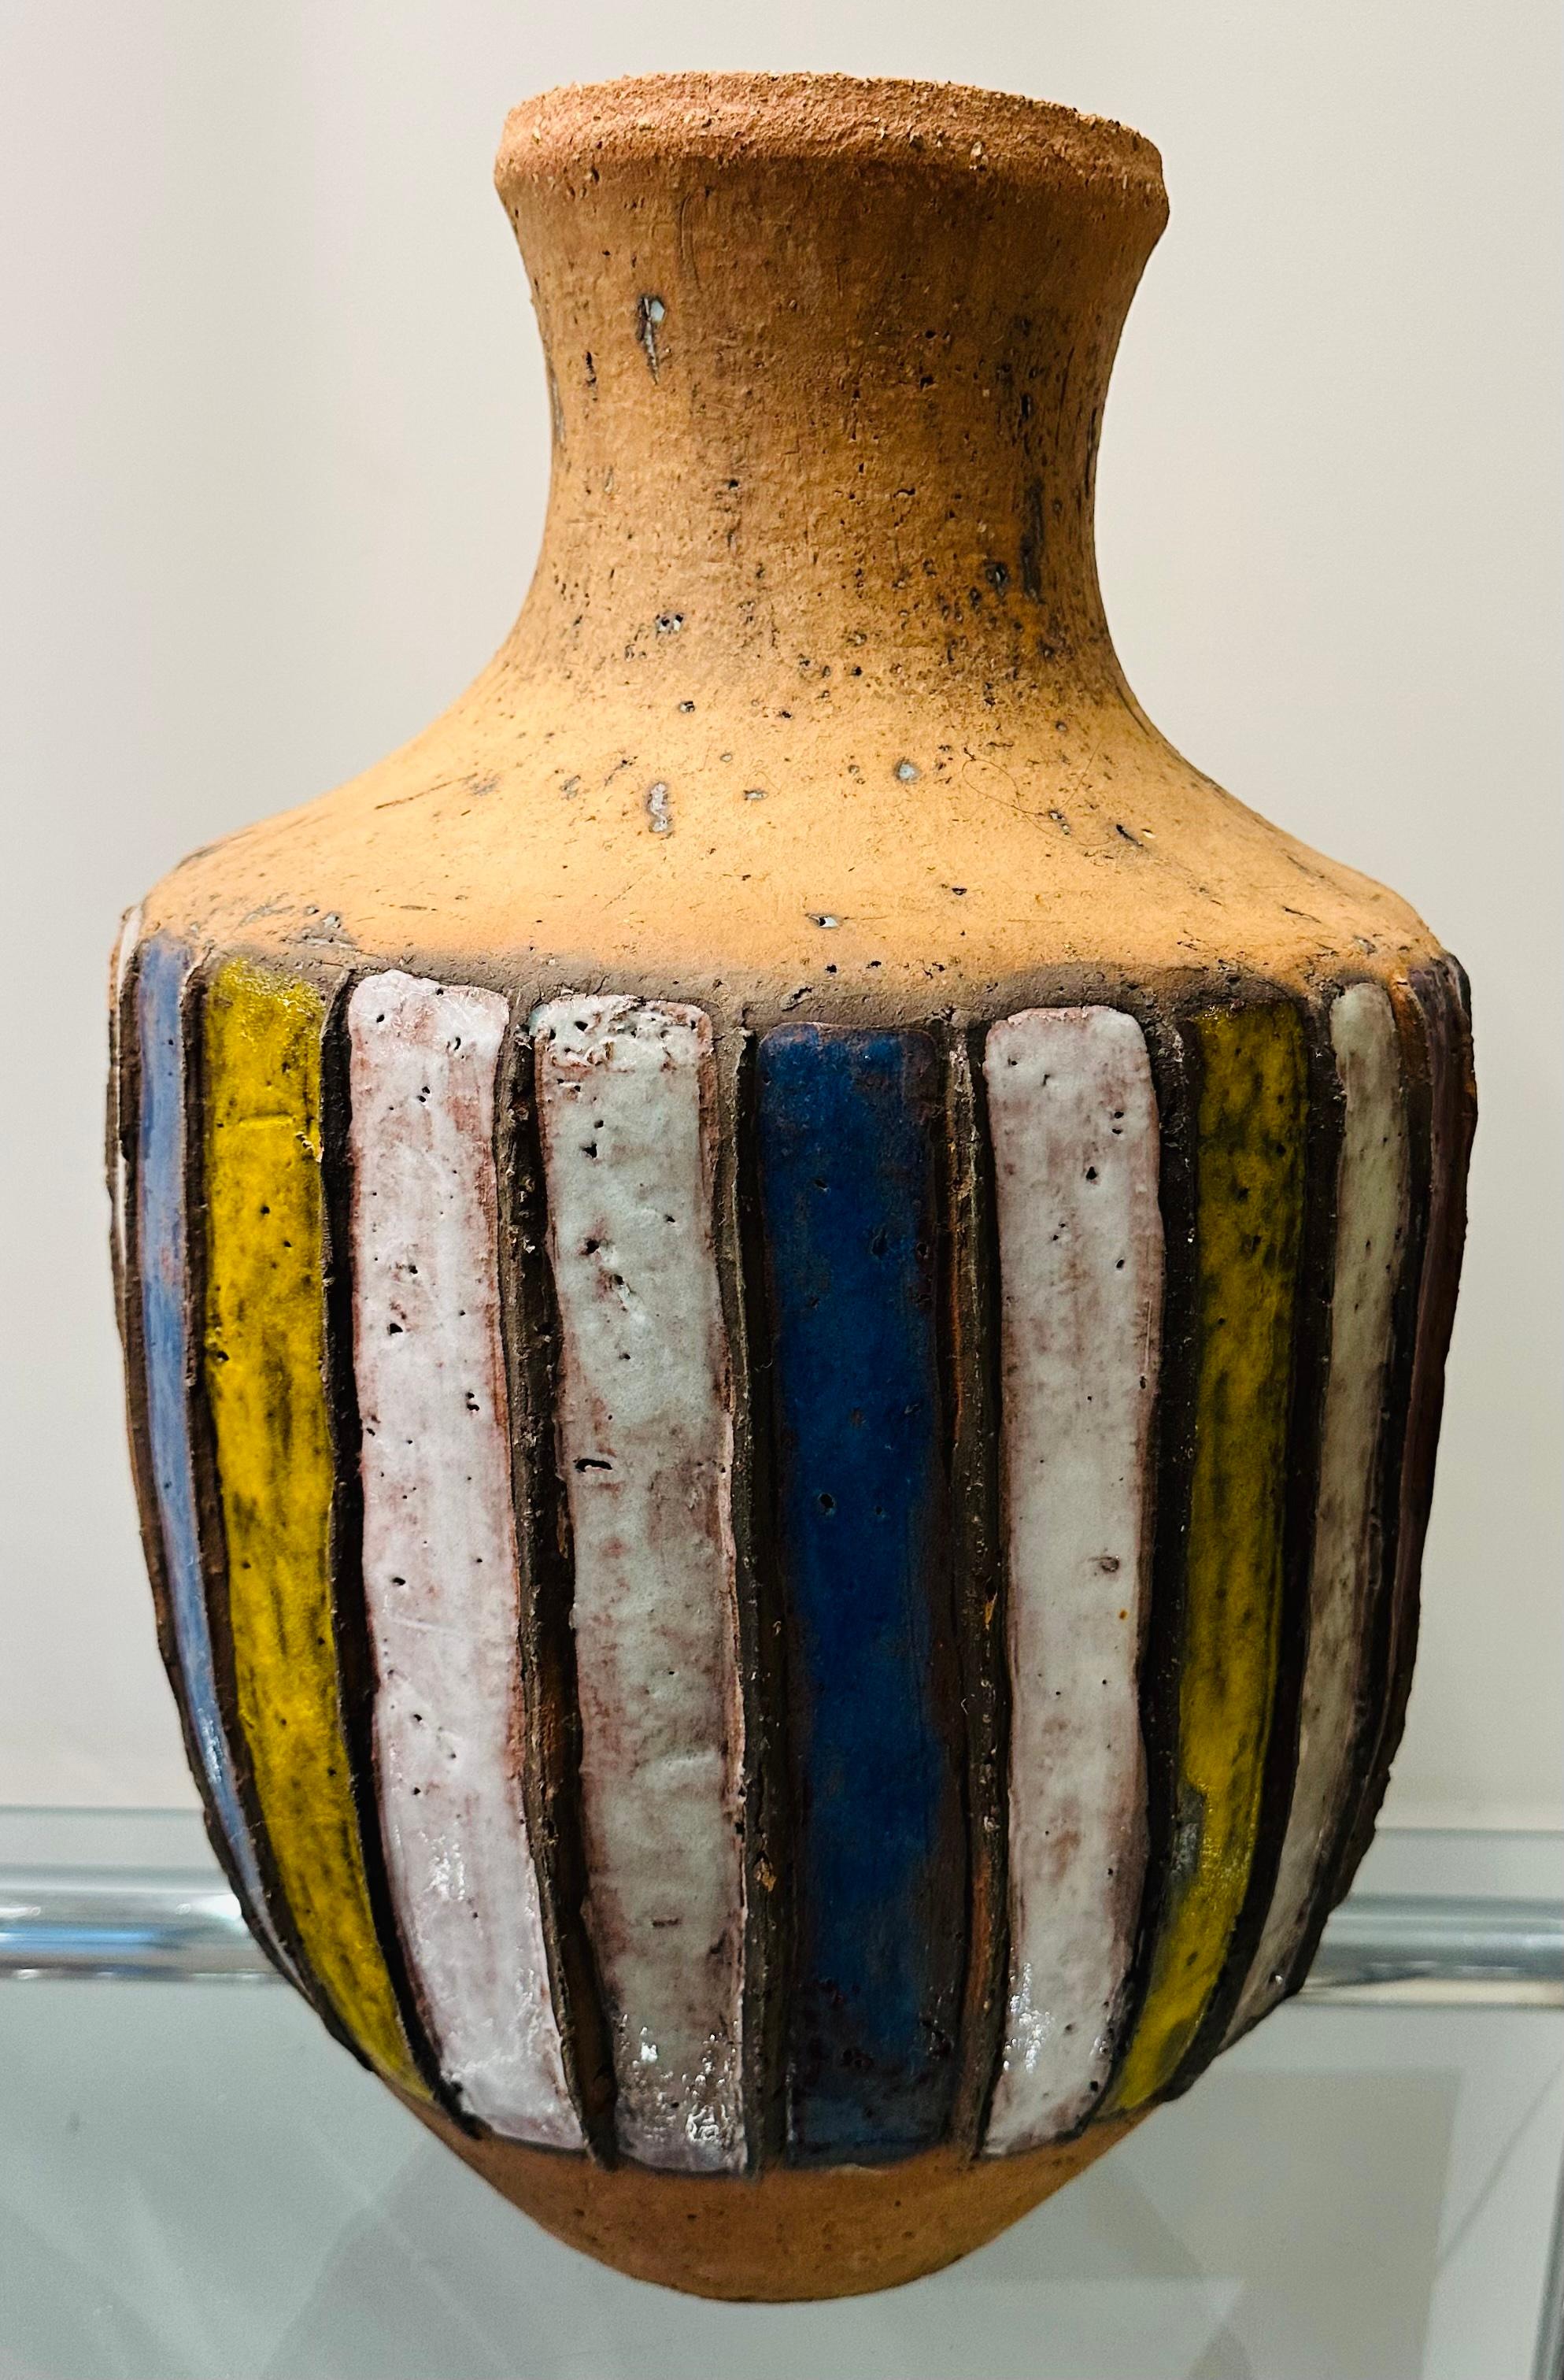 A large 1960s Italian multicoloured glazed and unglazed striped earthenware pottery vase or urn. 
In a very good rustic pre-used condition.  There is a tiny chip on one of the raised borders between the yellow and white glazed stripes which is